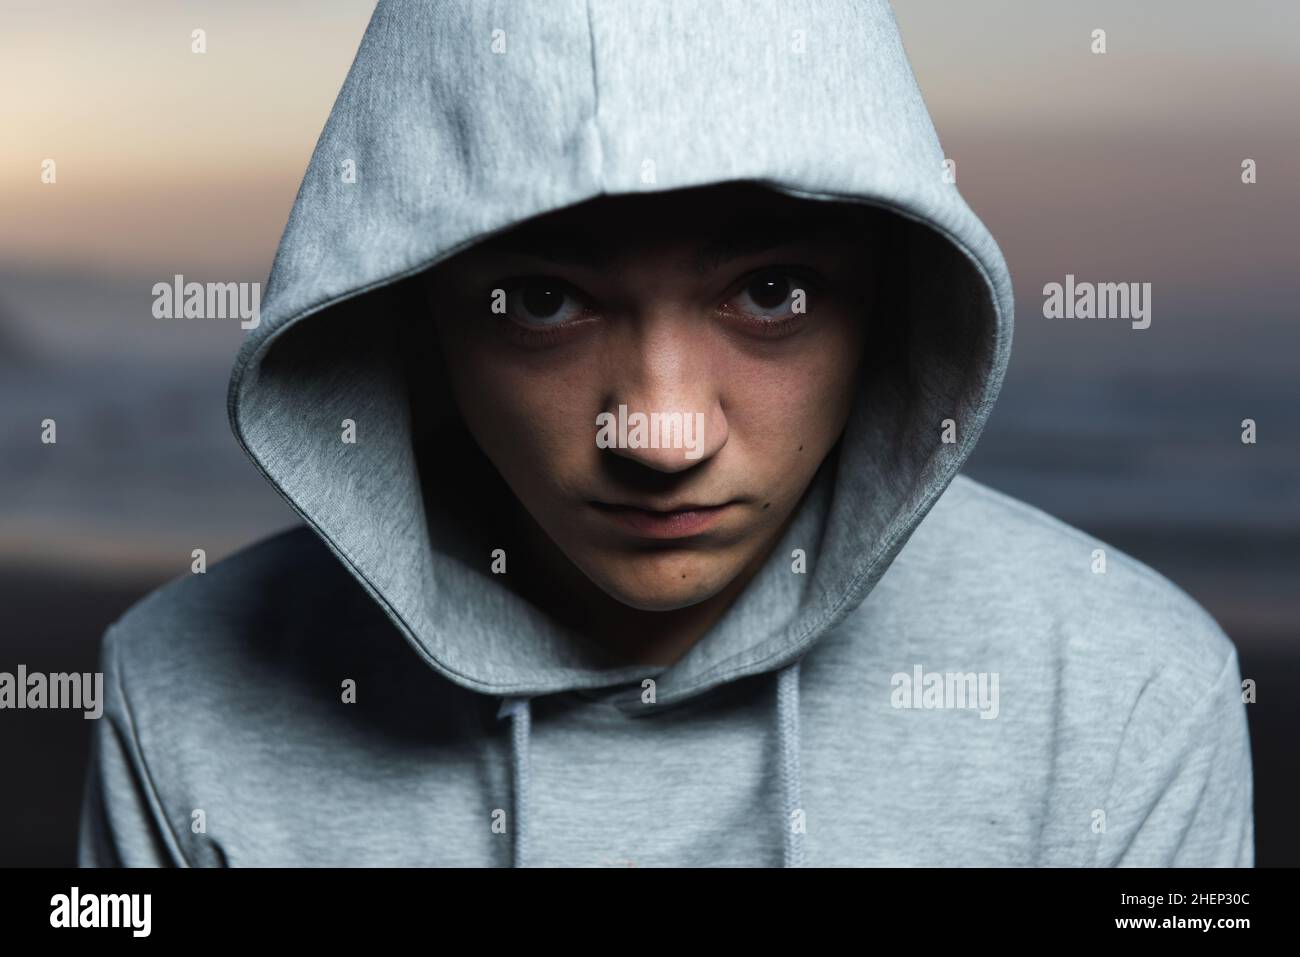 Dramatic portrait of serious hispanic teenager looking to the camera and wearing a hoodie. Stock Photo